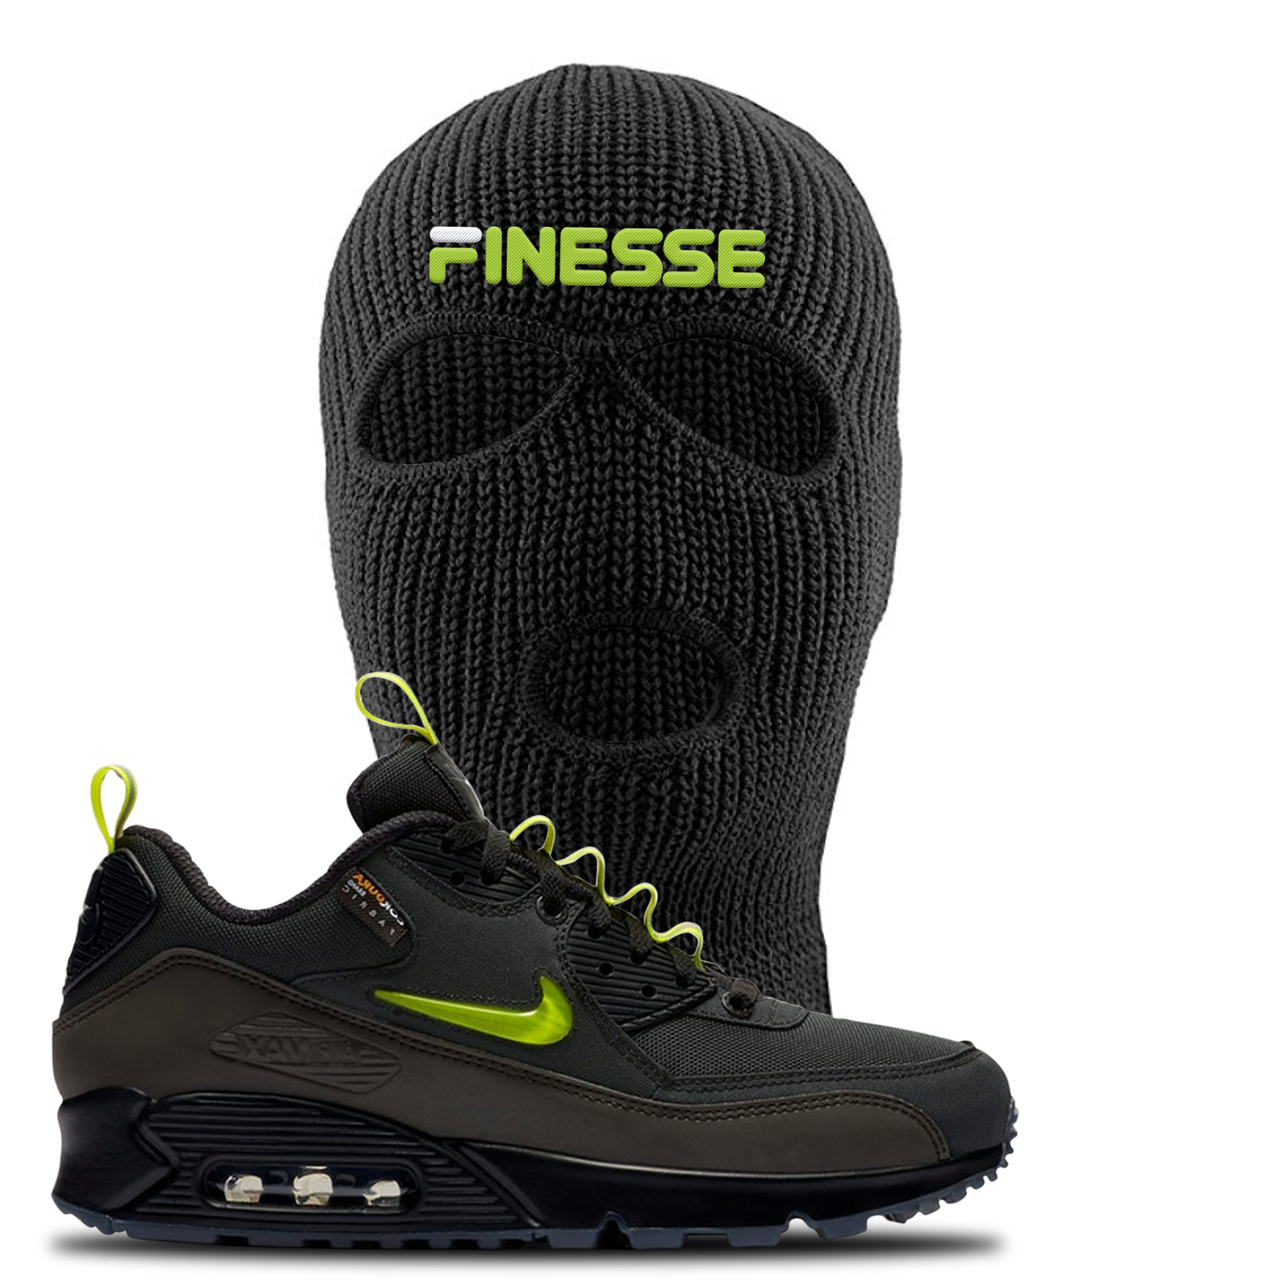 The Basement X Air Max 90 Manchester Finesse Black Sneaker Hook Up Ski Mask